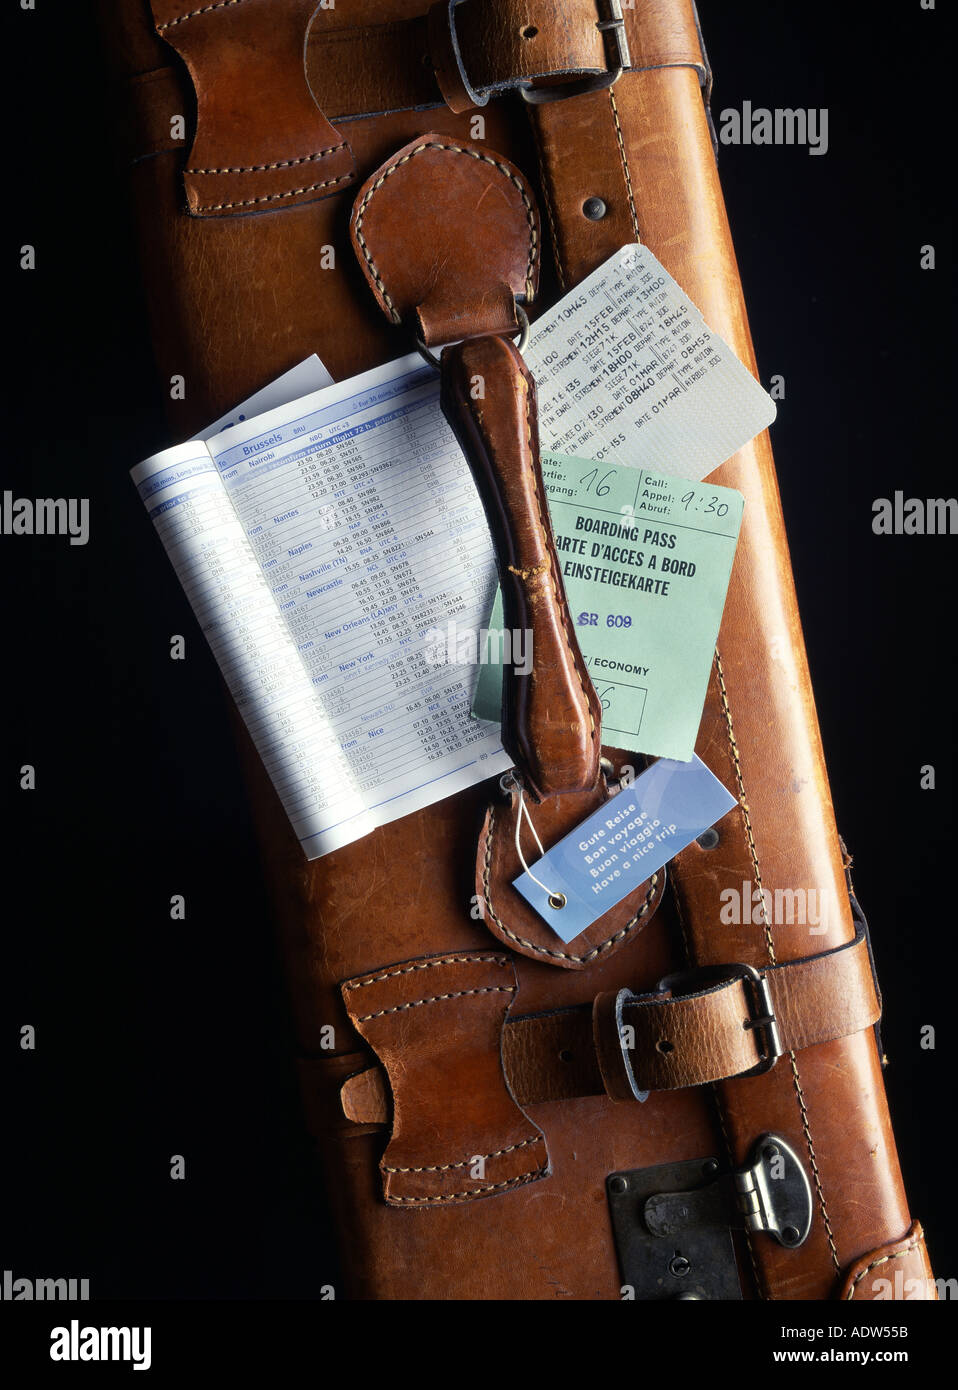 AIRLINE TIMETABLE WITH PASSENGER TICKET AND BOARDING PASS ON TOP OF A LEATHER SUITCASE Stock Photo